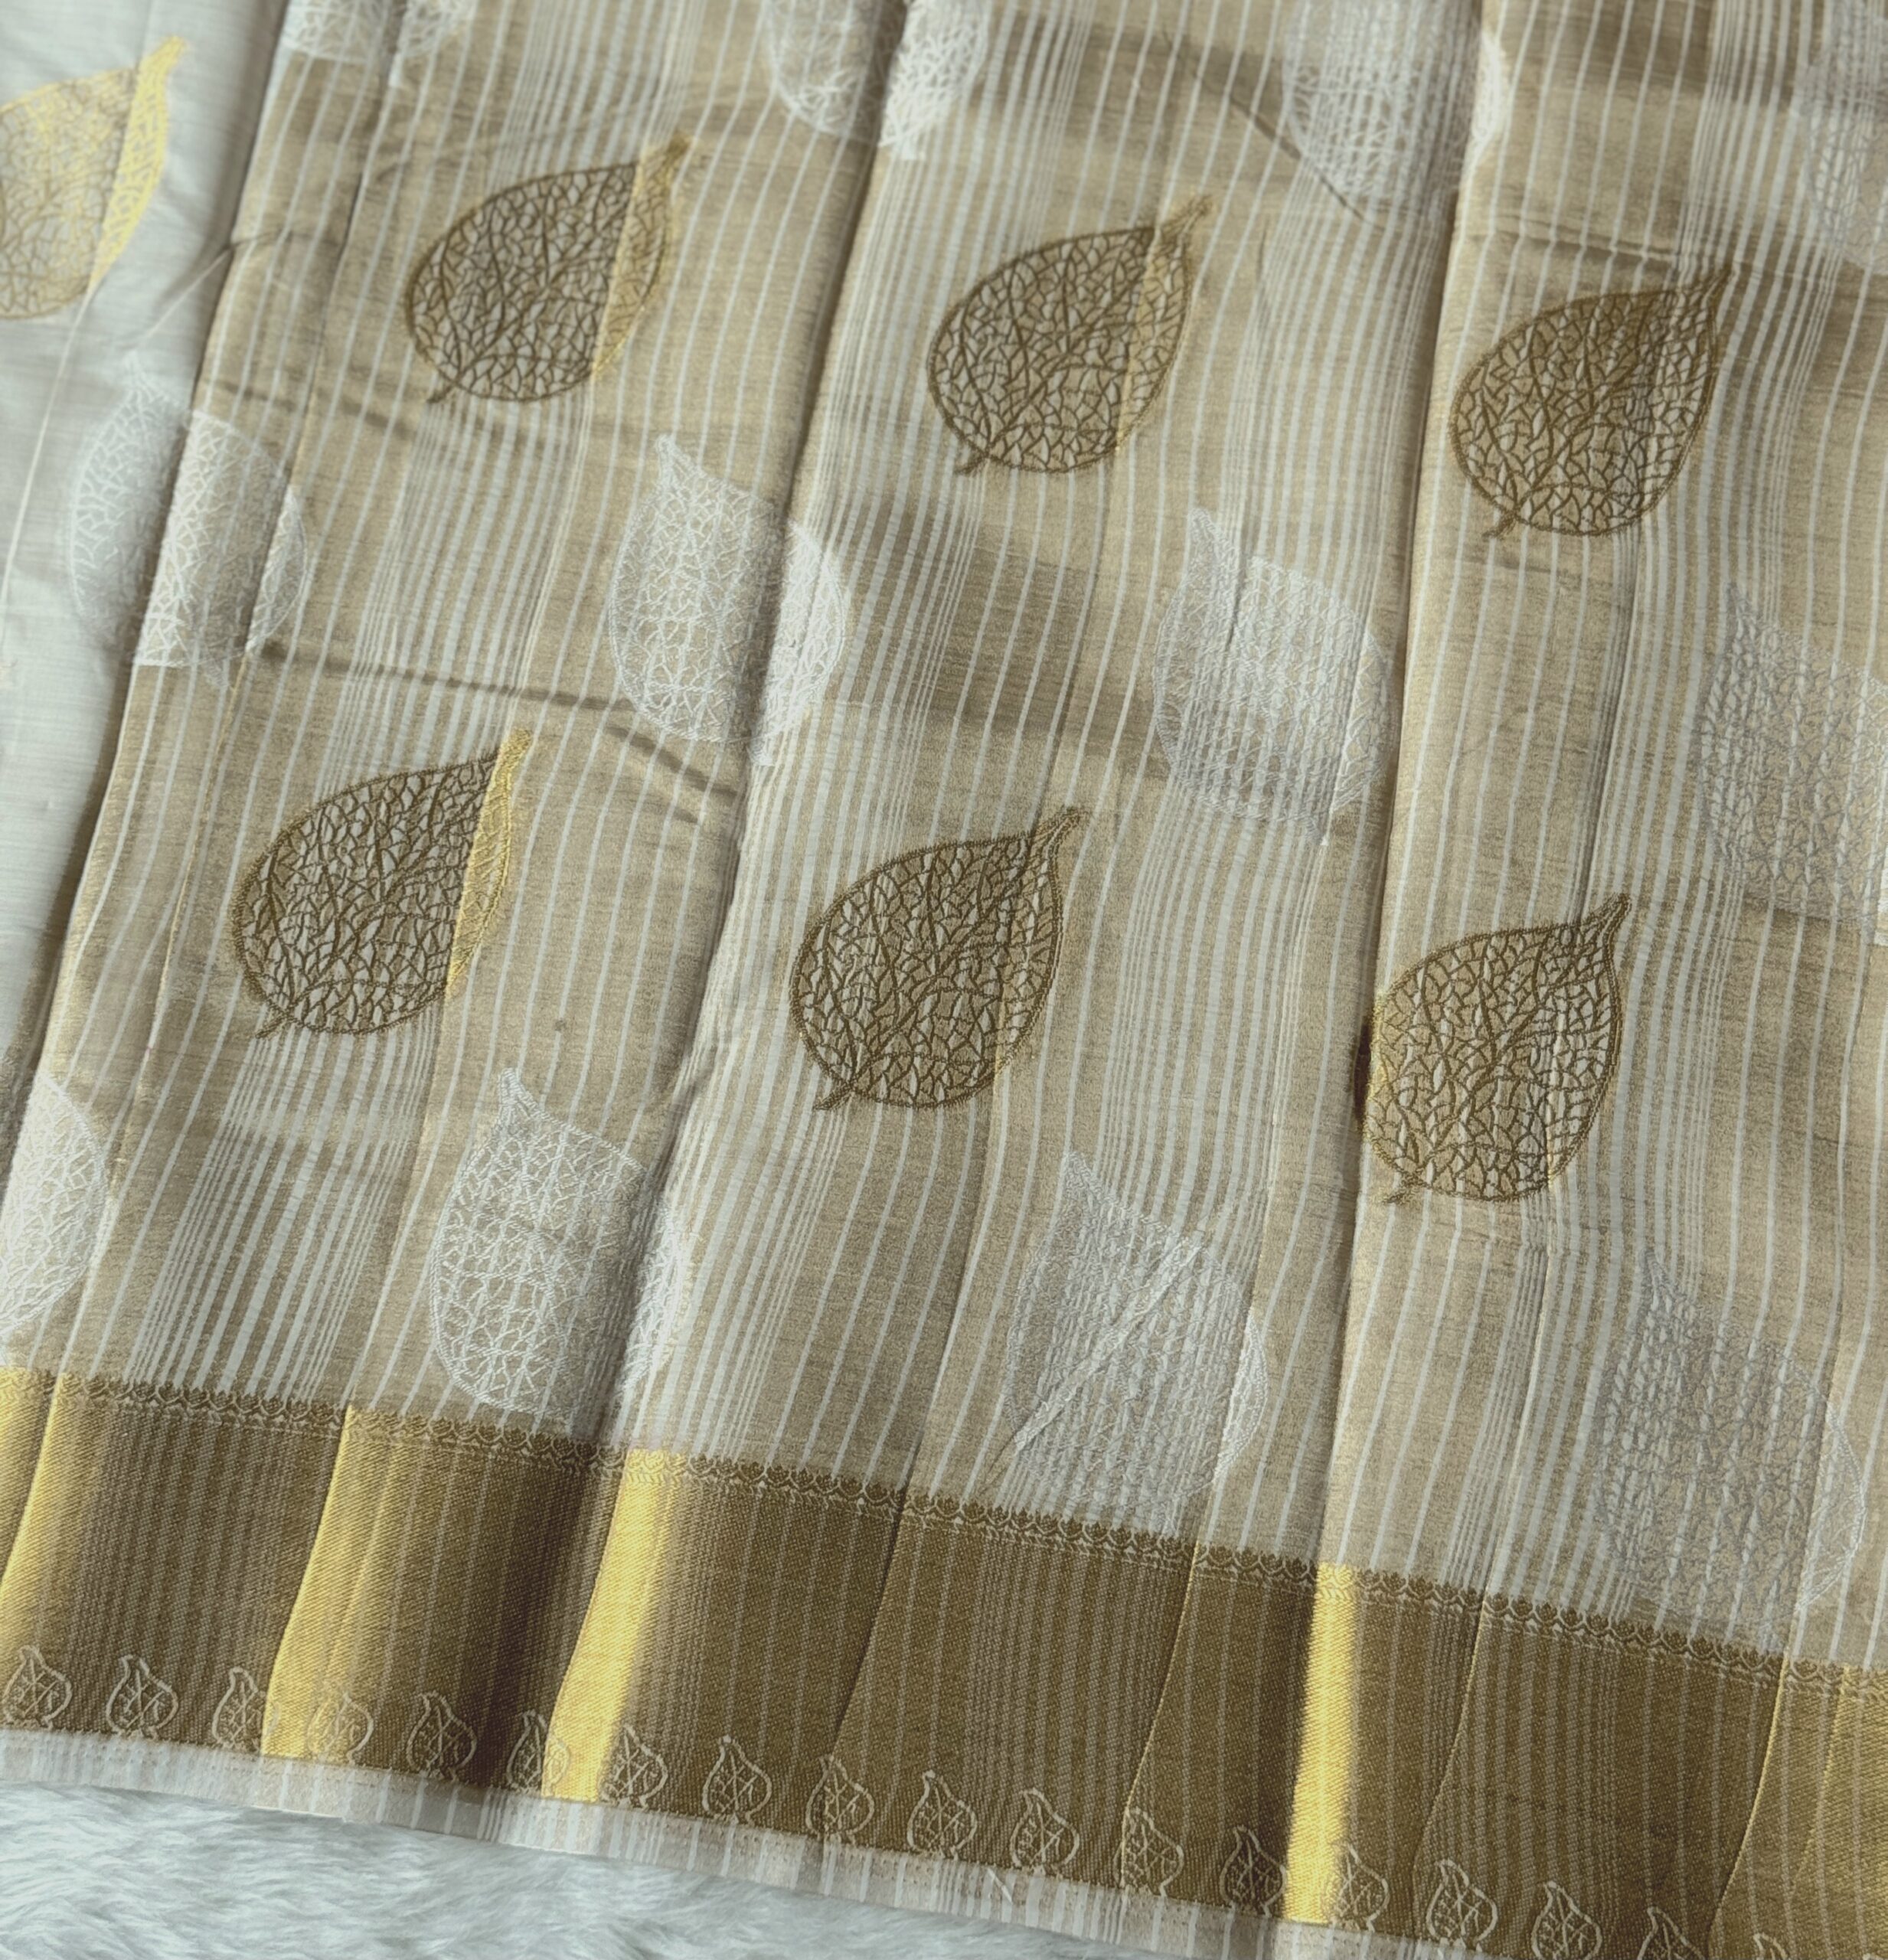 Beautiful tussar cotton saree with leaf design and golden zari border with running blouse.